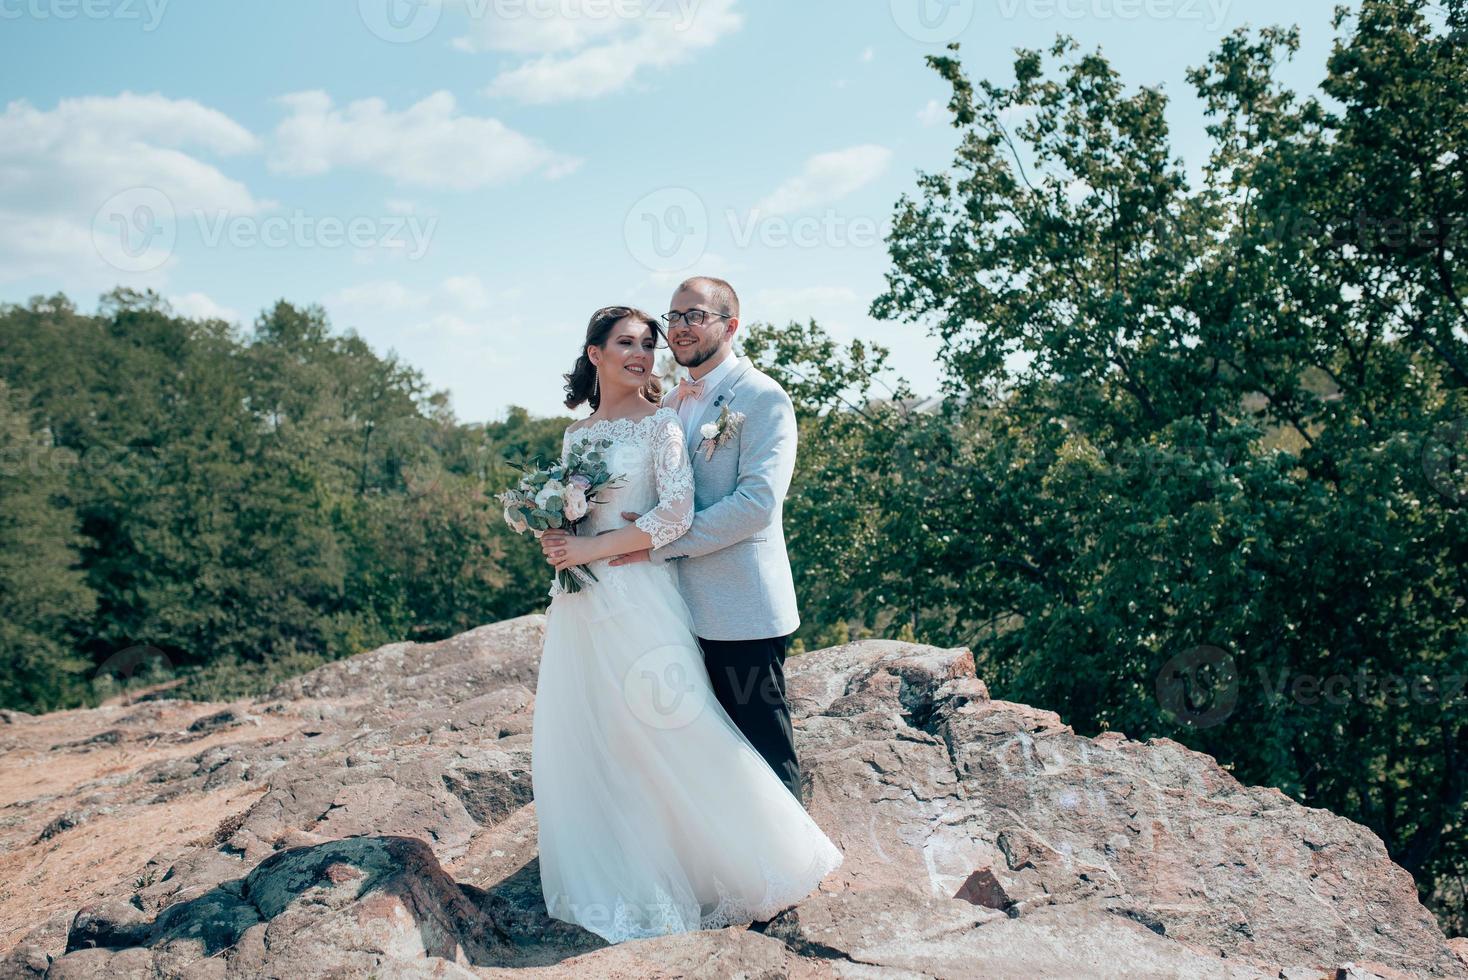 Wedding photo of a bearded groom with glasses in a gray jacket and a bride on a rock